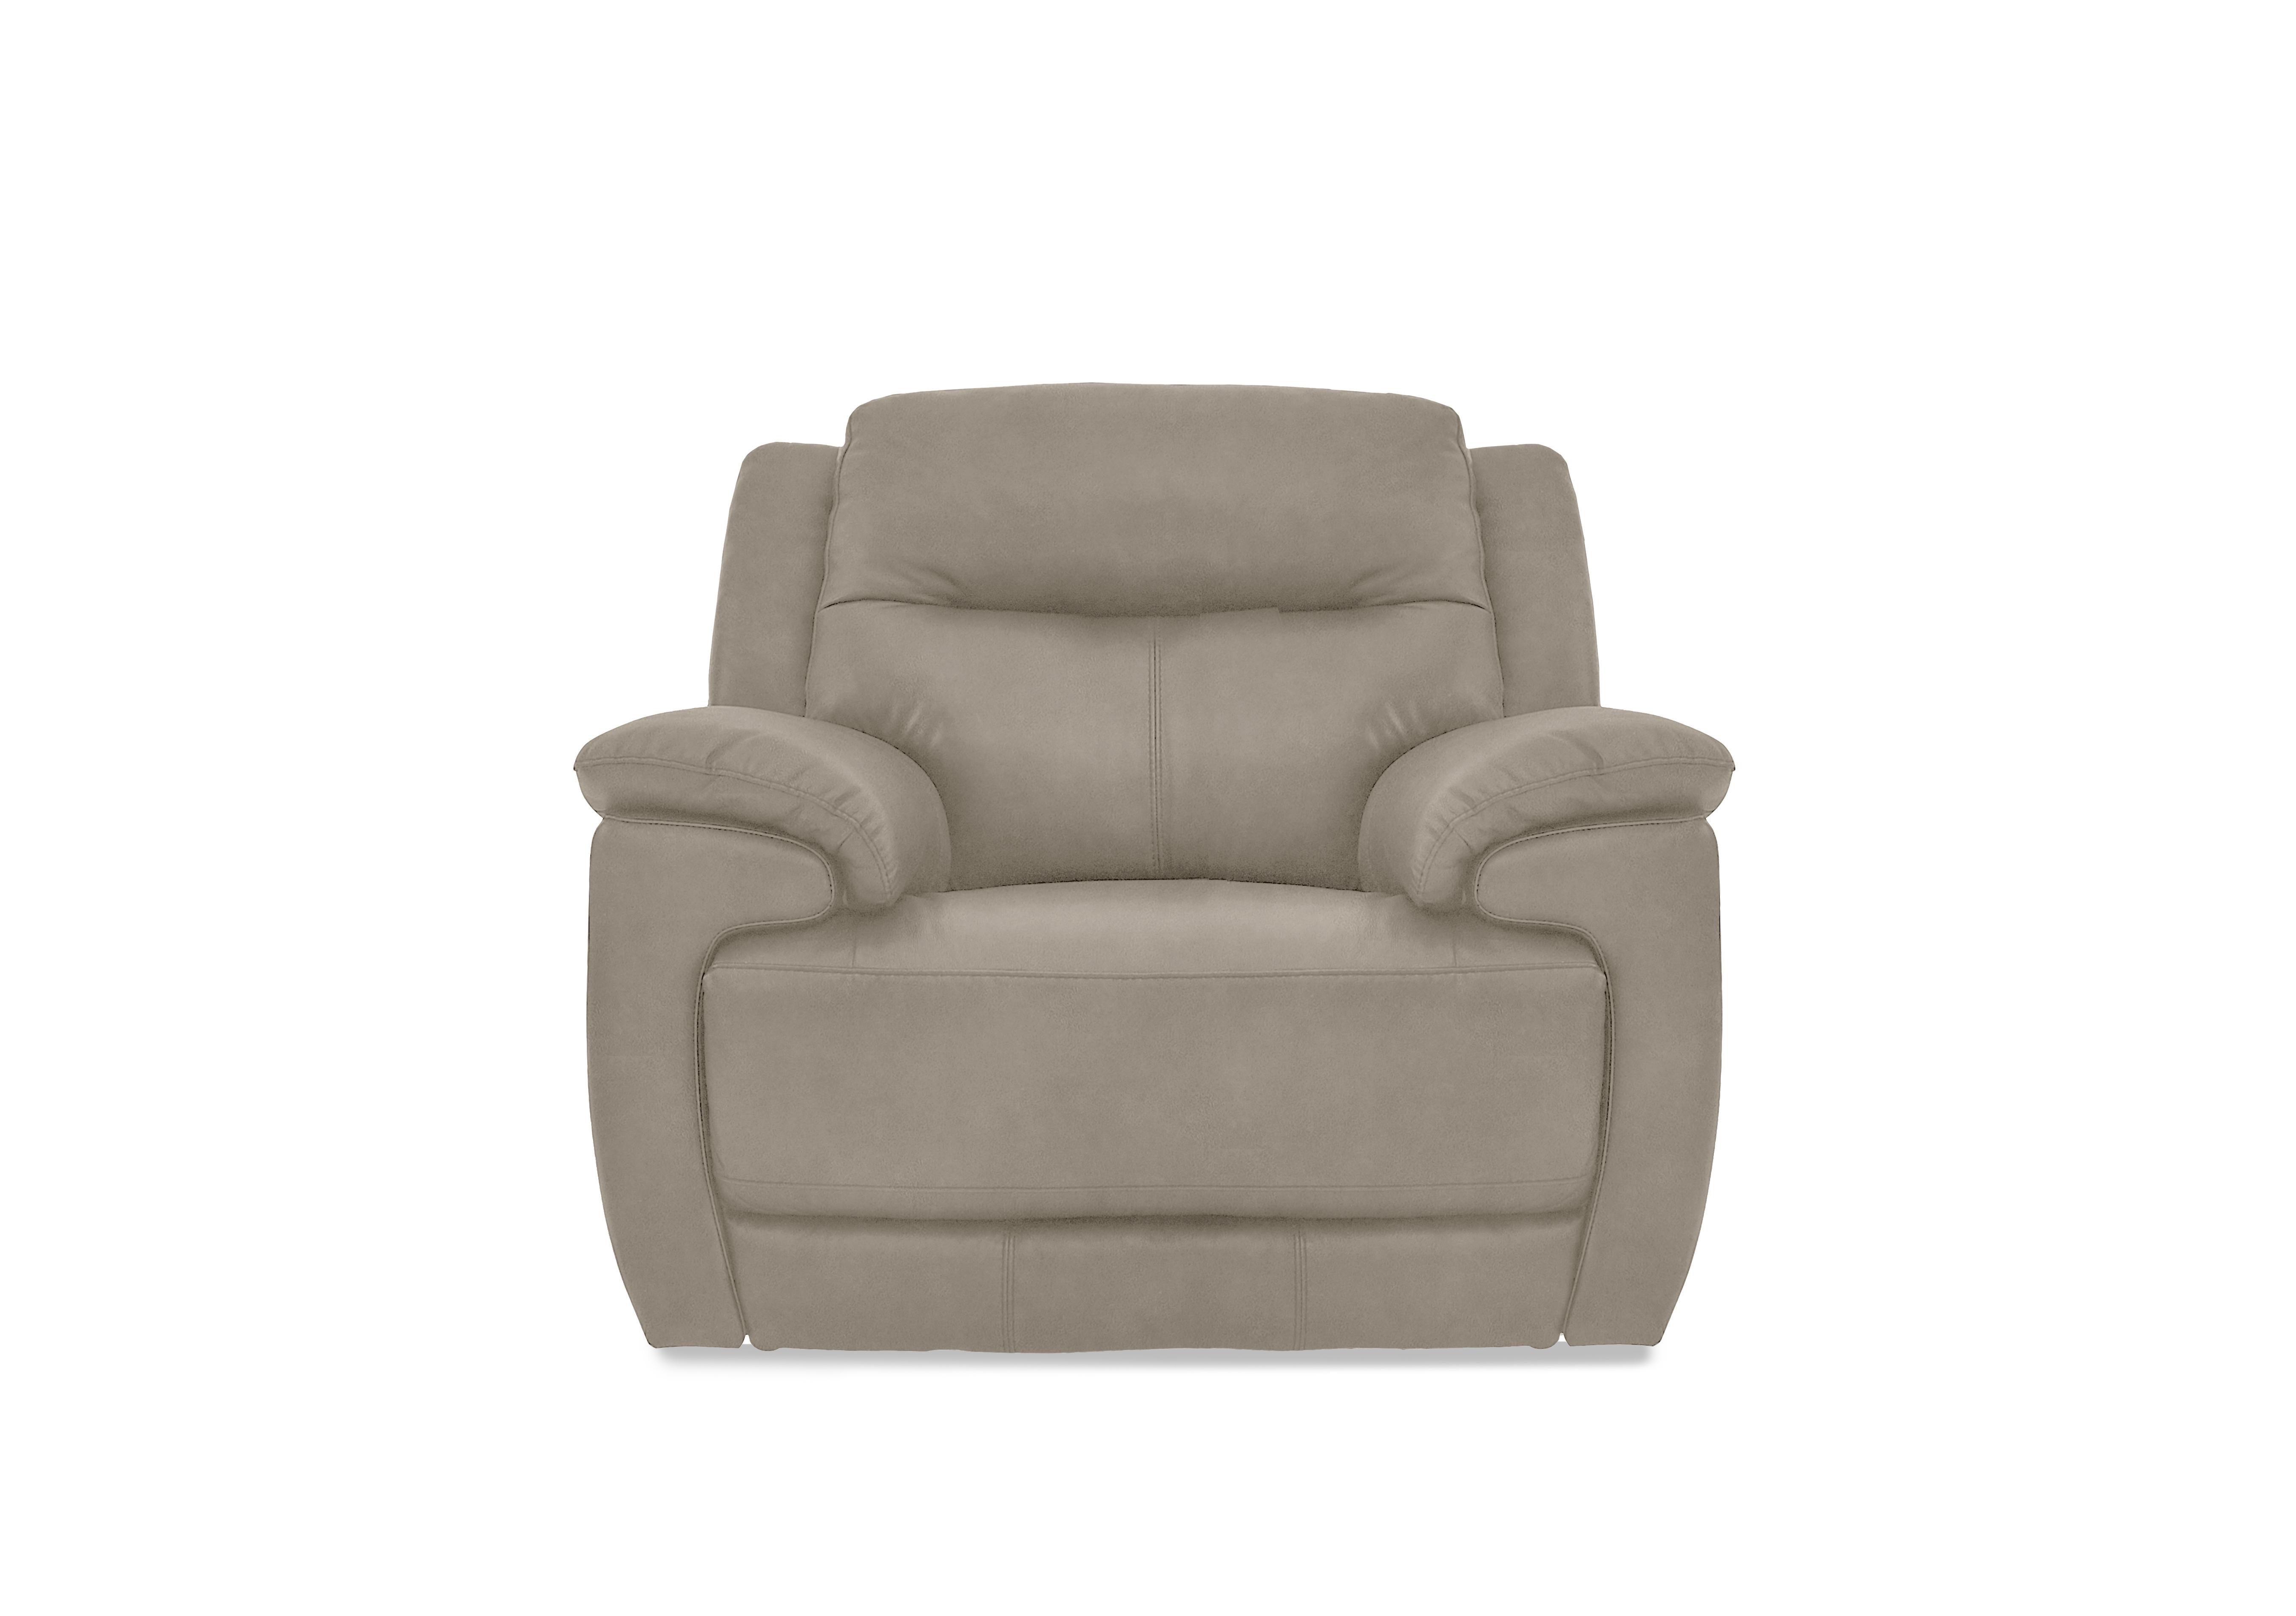 Touch Fabric Armchair in Bfa-Raf-R946 Oyster on Furniture Village